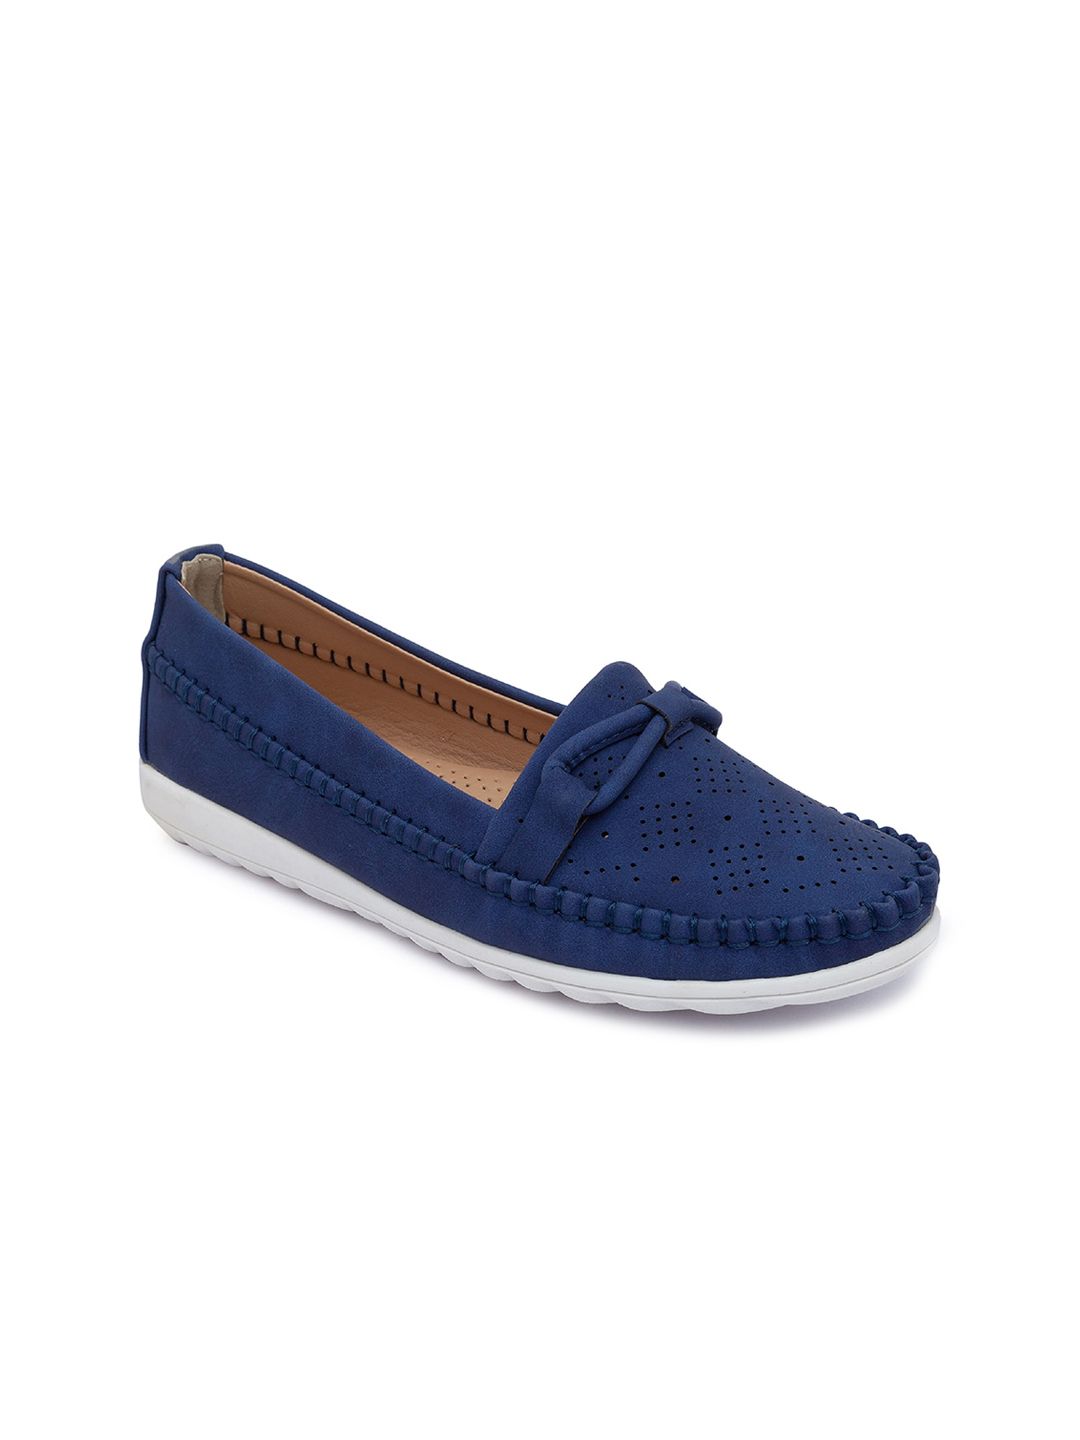 CERIZ Women Navy Blue Perforations Boat Shoes Price in India